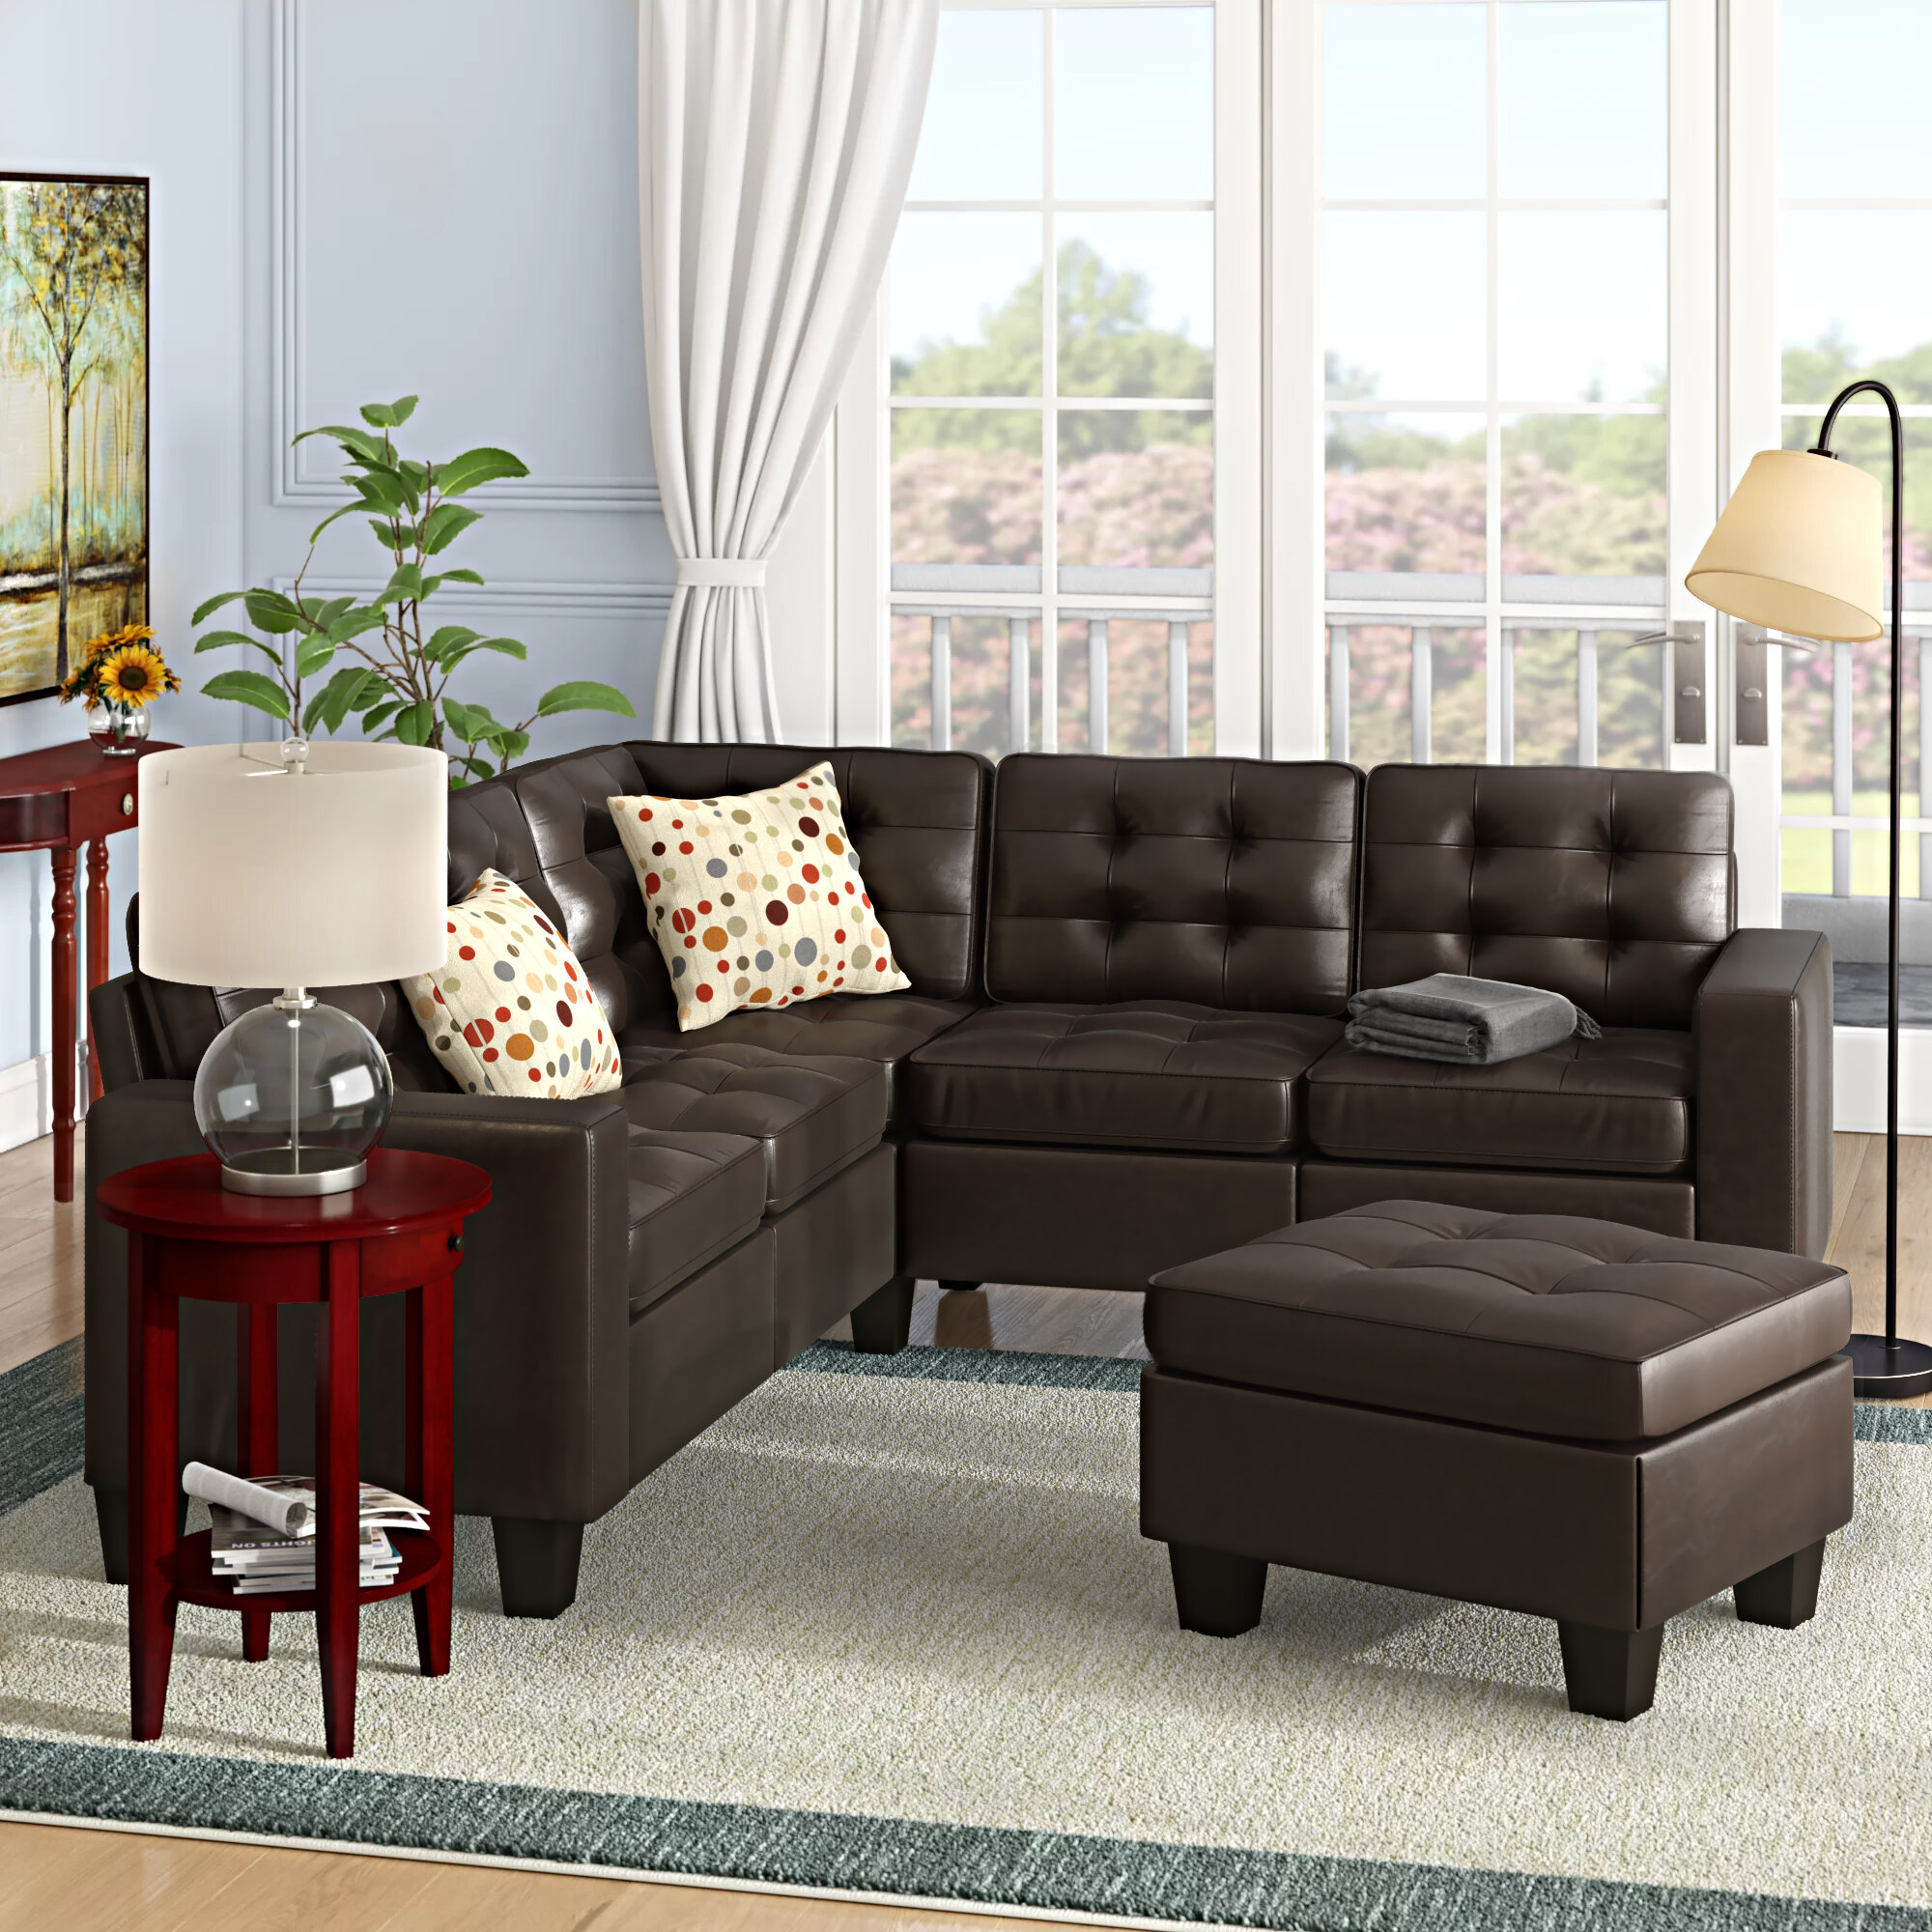 Karsyn 84″ Wide Faux Leather Symmetrical Corner Sectional with Ottoman